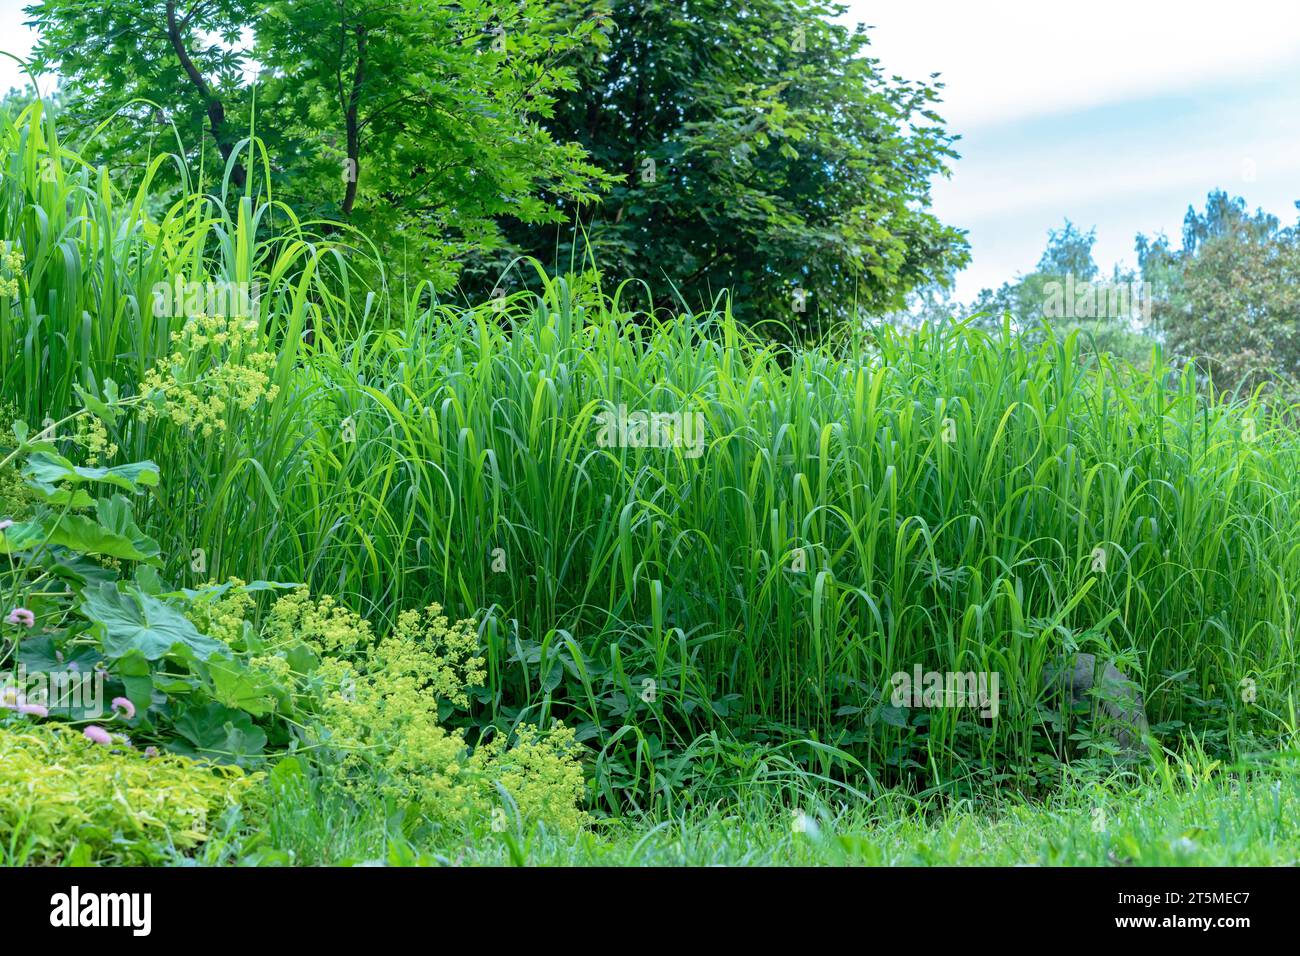 Tall grass, trees, flowers and plants in the summer garden. Stock Photo